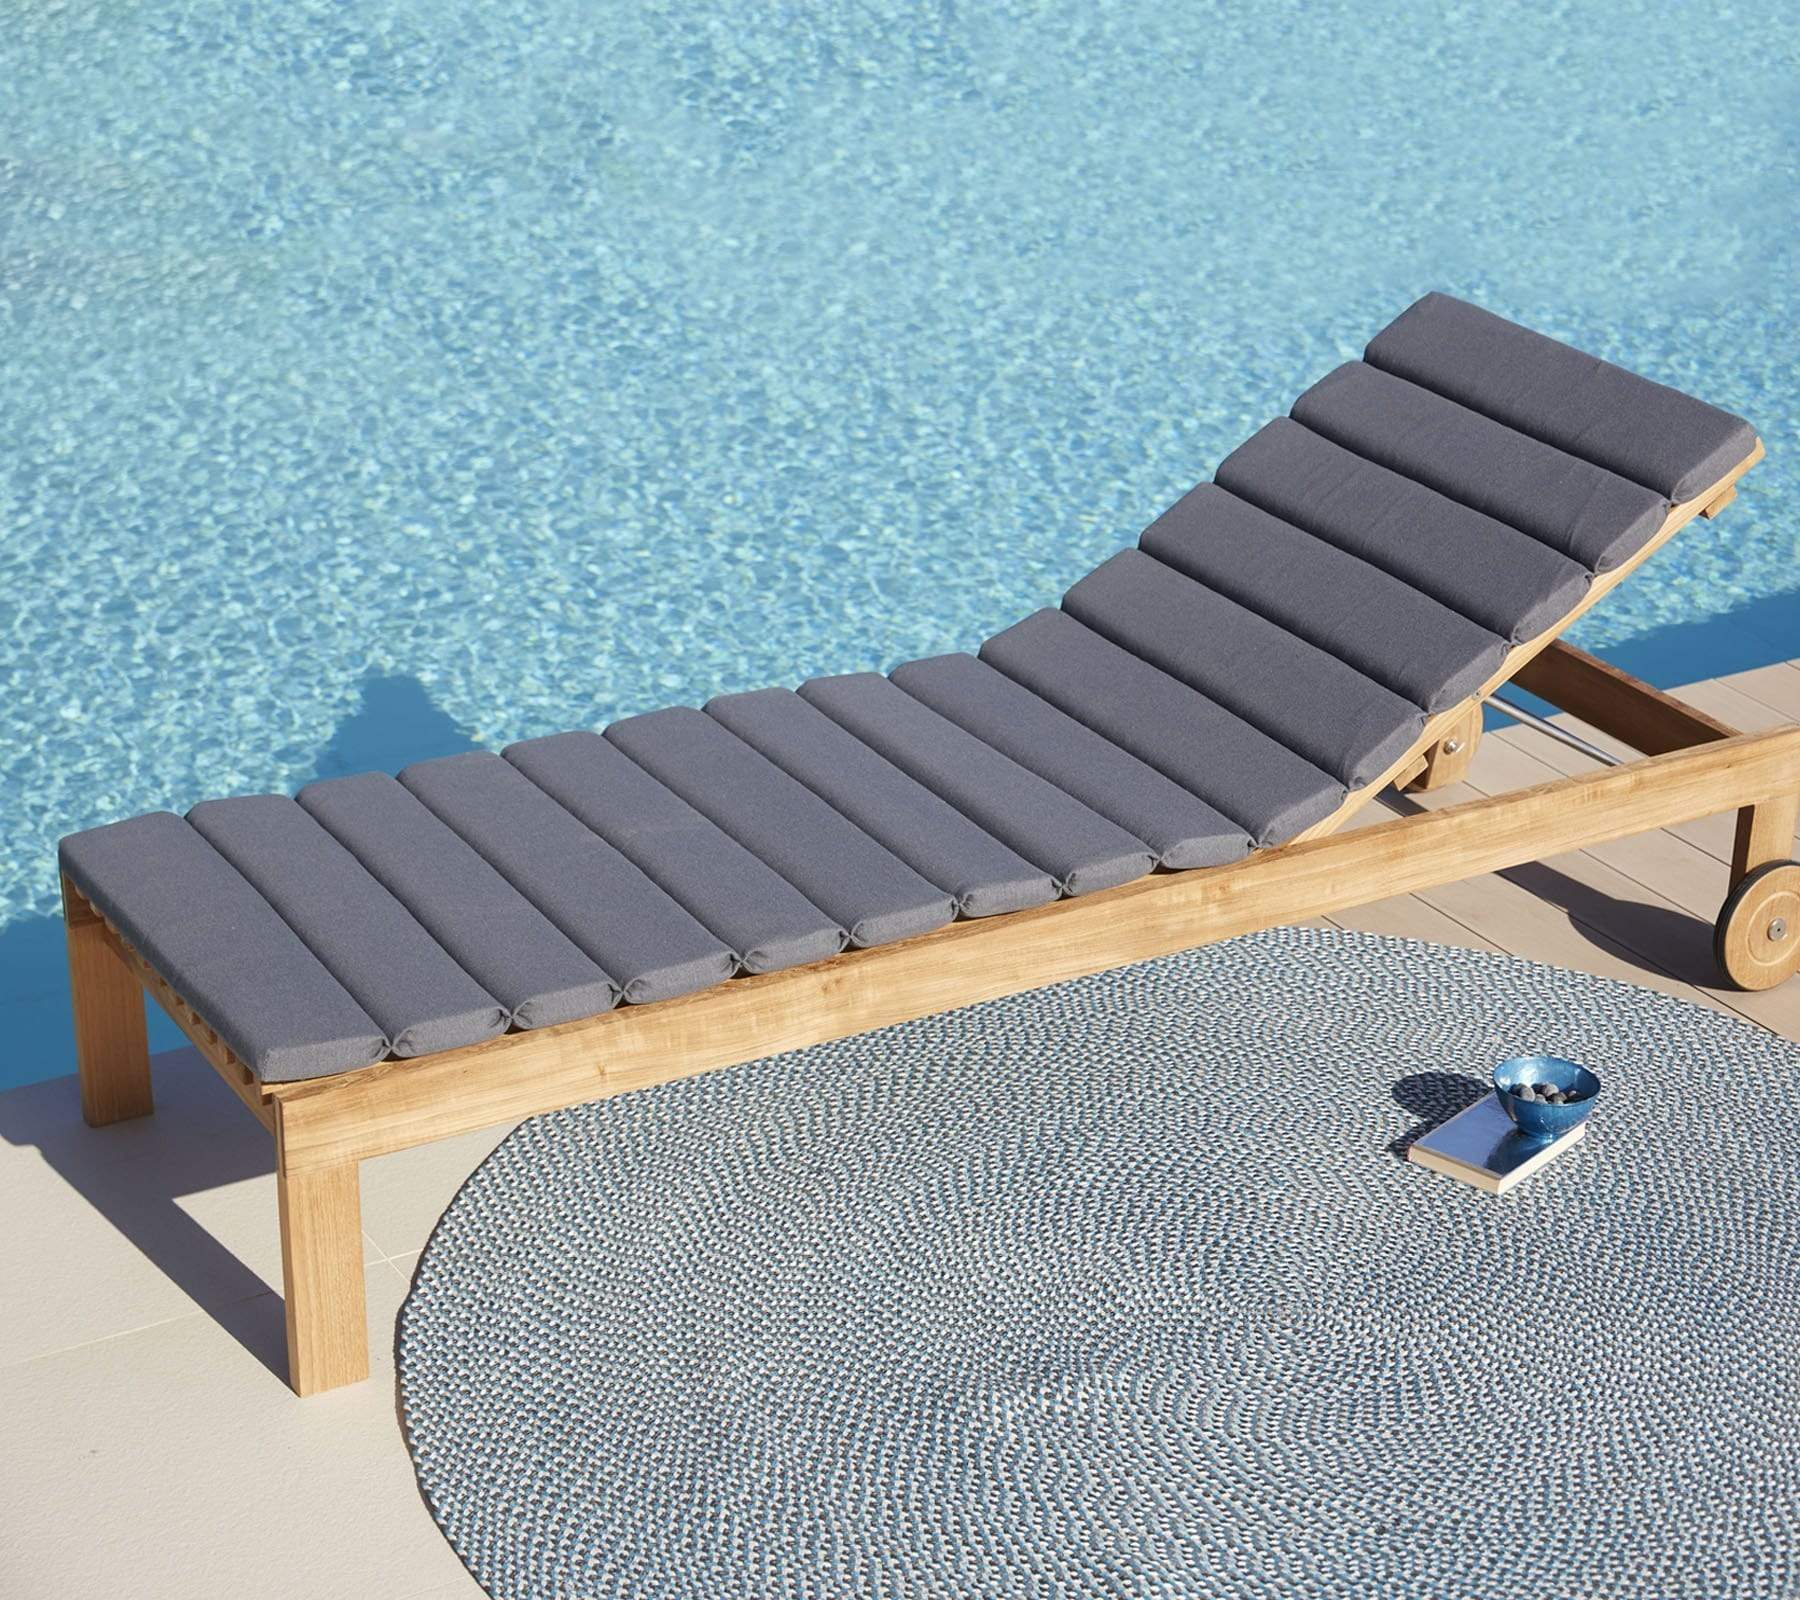 Boxhill's Amaze Chaise Lounge with cushion lifestyle image beside the pool